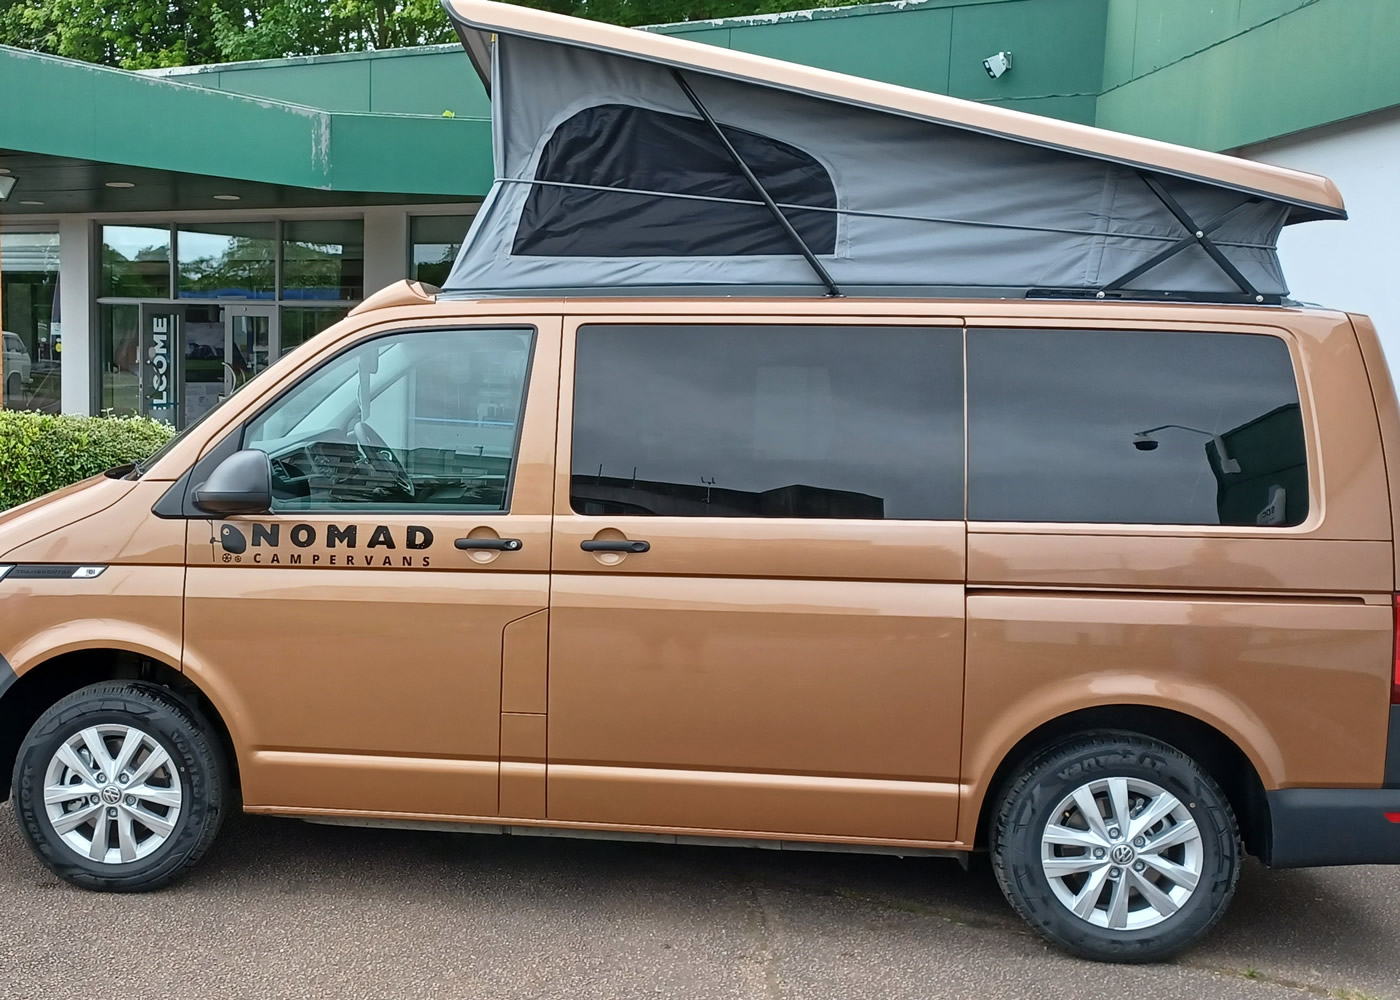 Nomad Camper VW6.1 - Copper Edition 16inch alloys 04a